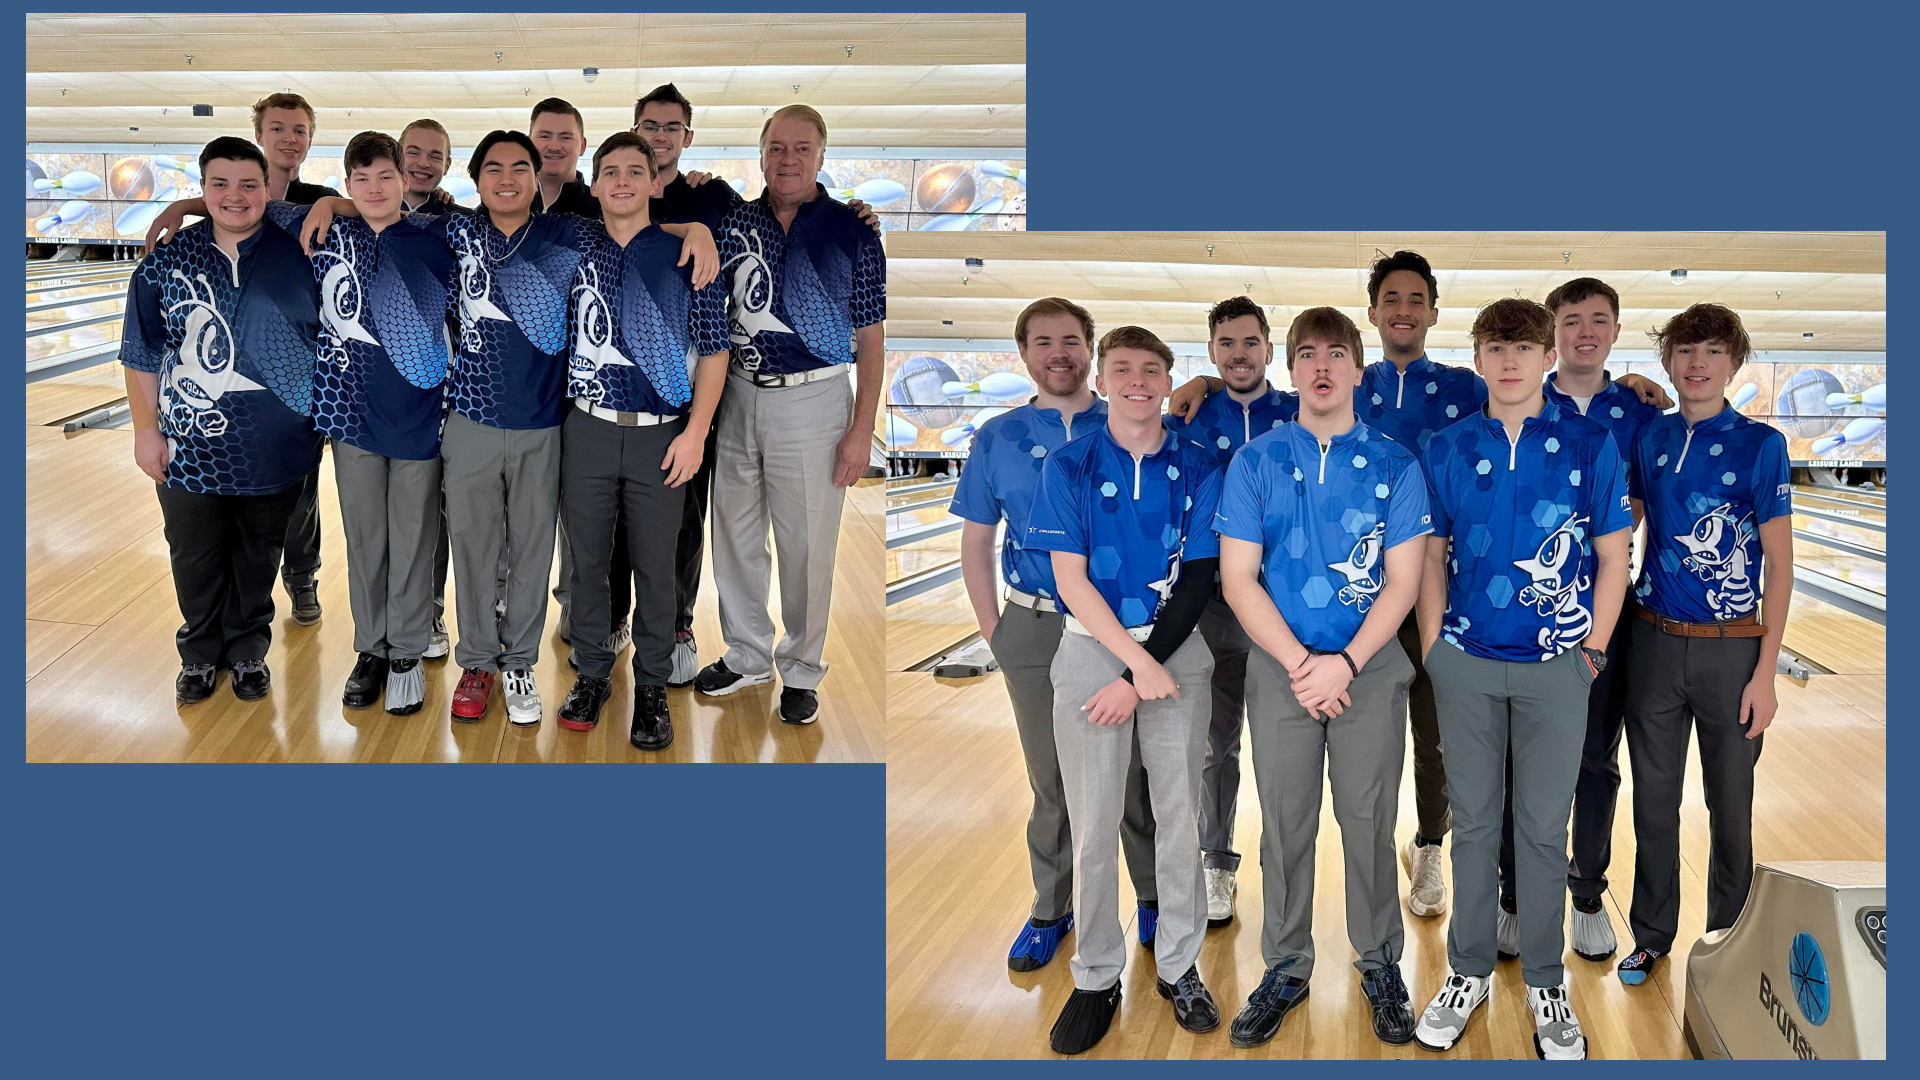 Bowlers compete at 23rd annual Leatherneck Classic